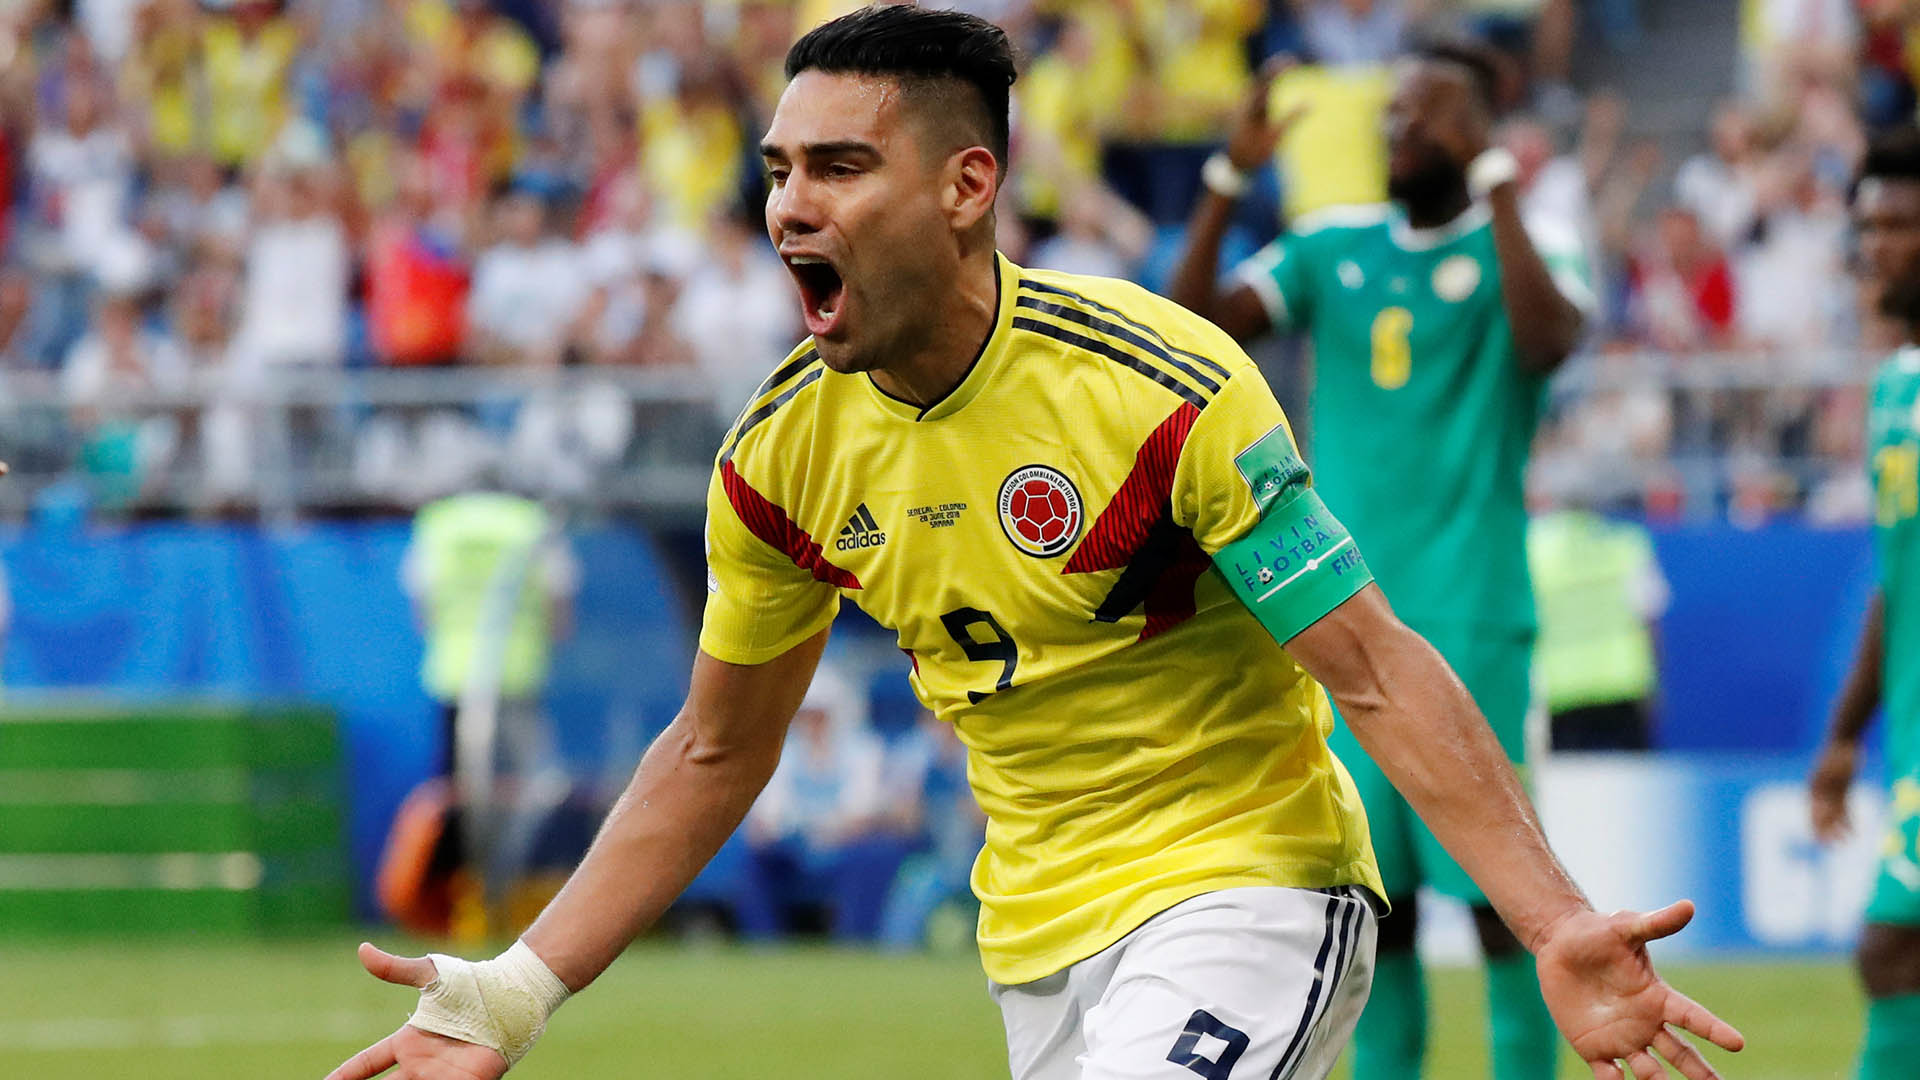 The Top 10 Colombian Soccer Players of All Time